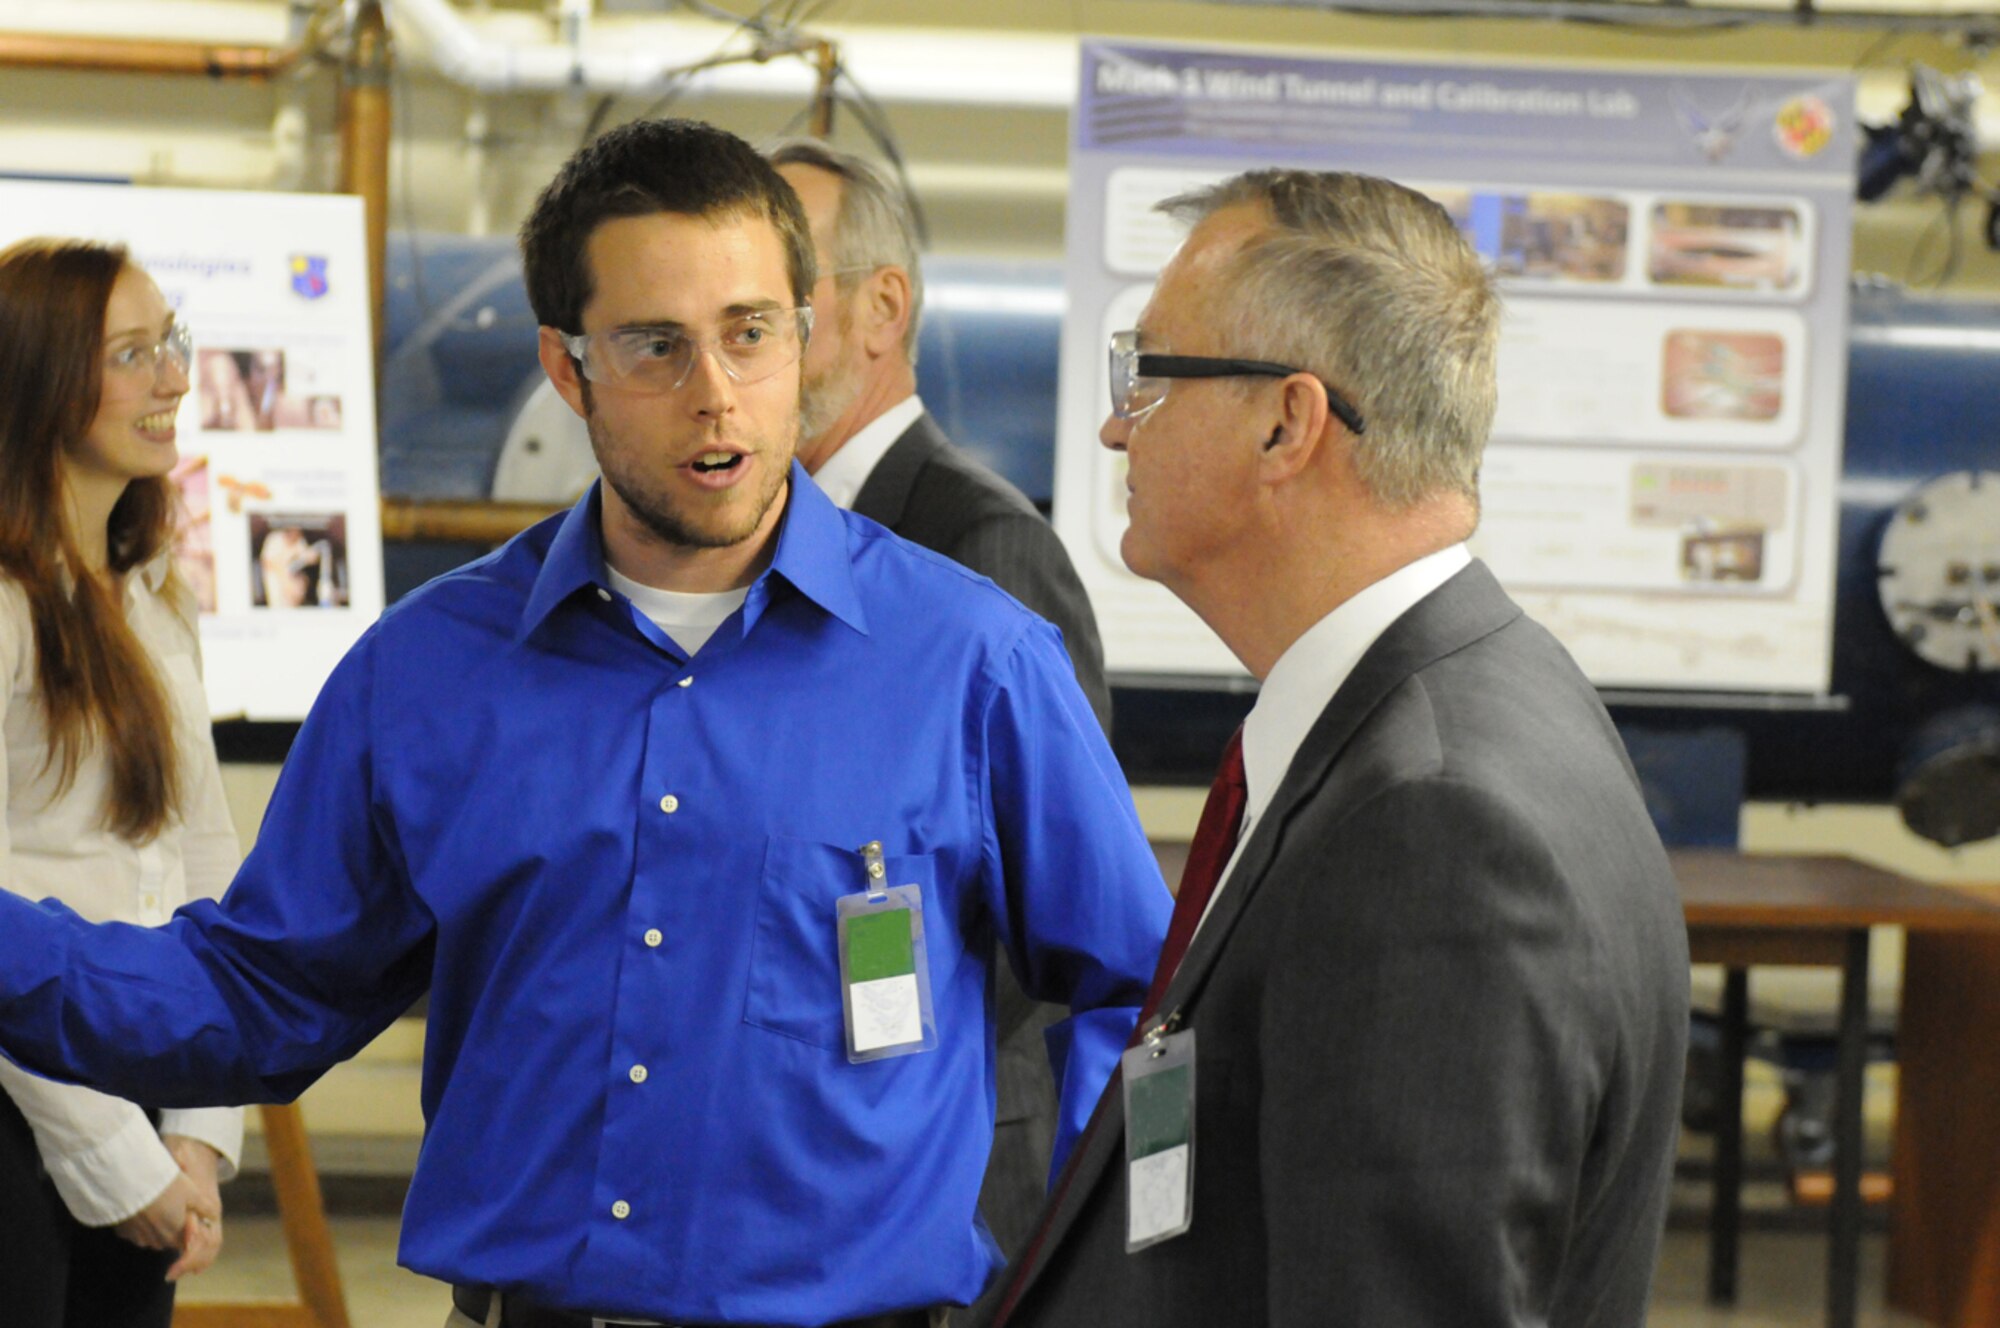 Kevin Ryan, a University of Maryland student, explains important aspects of his research to Edward Greer, TRMC program manager for test, evaluation, science and technology, at the Jan. 31 Centers of Testing Excellence (COTE) pilot program kickoff at the Hypervelocity Tunnel 9 facility in Silver Spring, Md. (Photo provided)